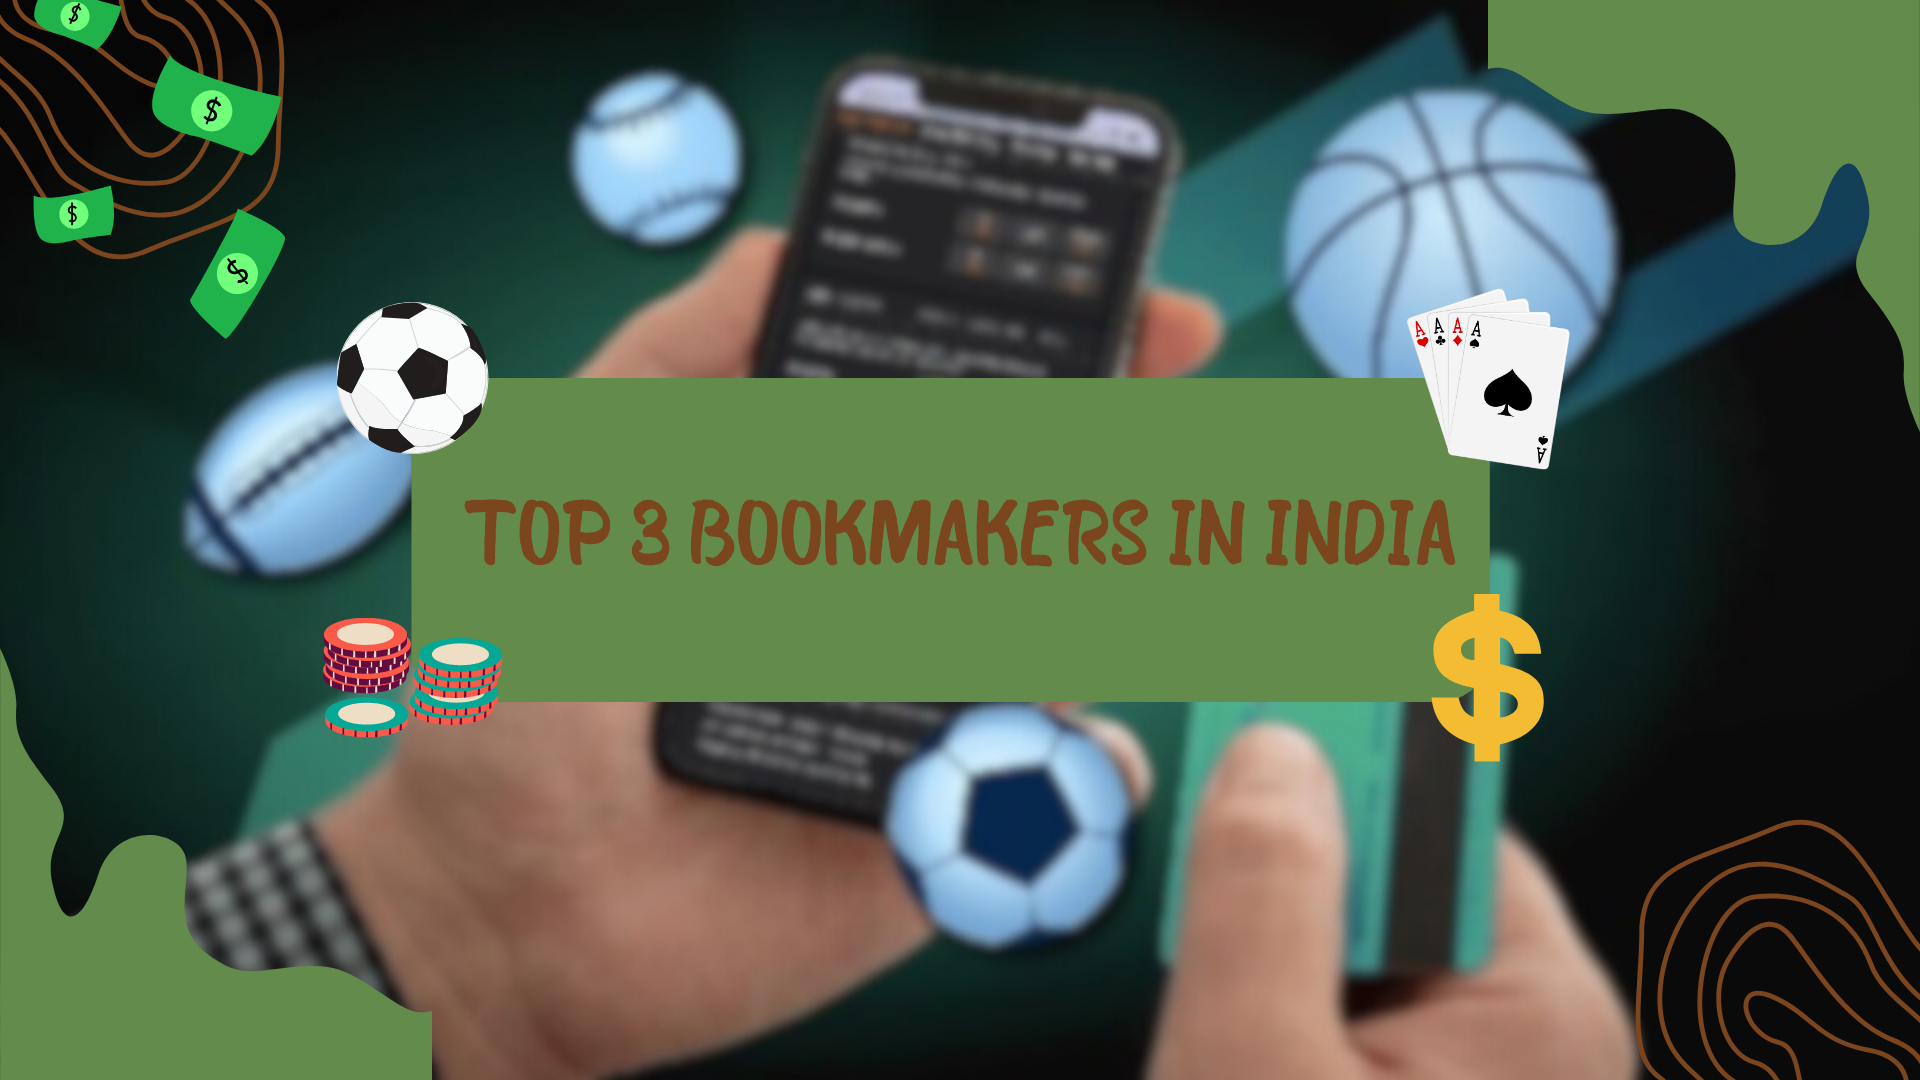 Top 3 Bookmakers in India